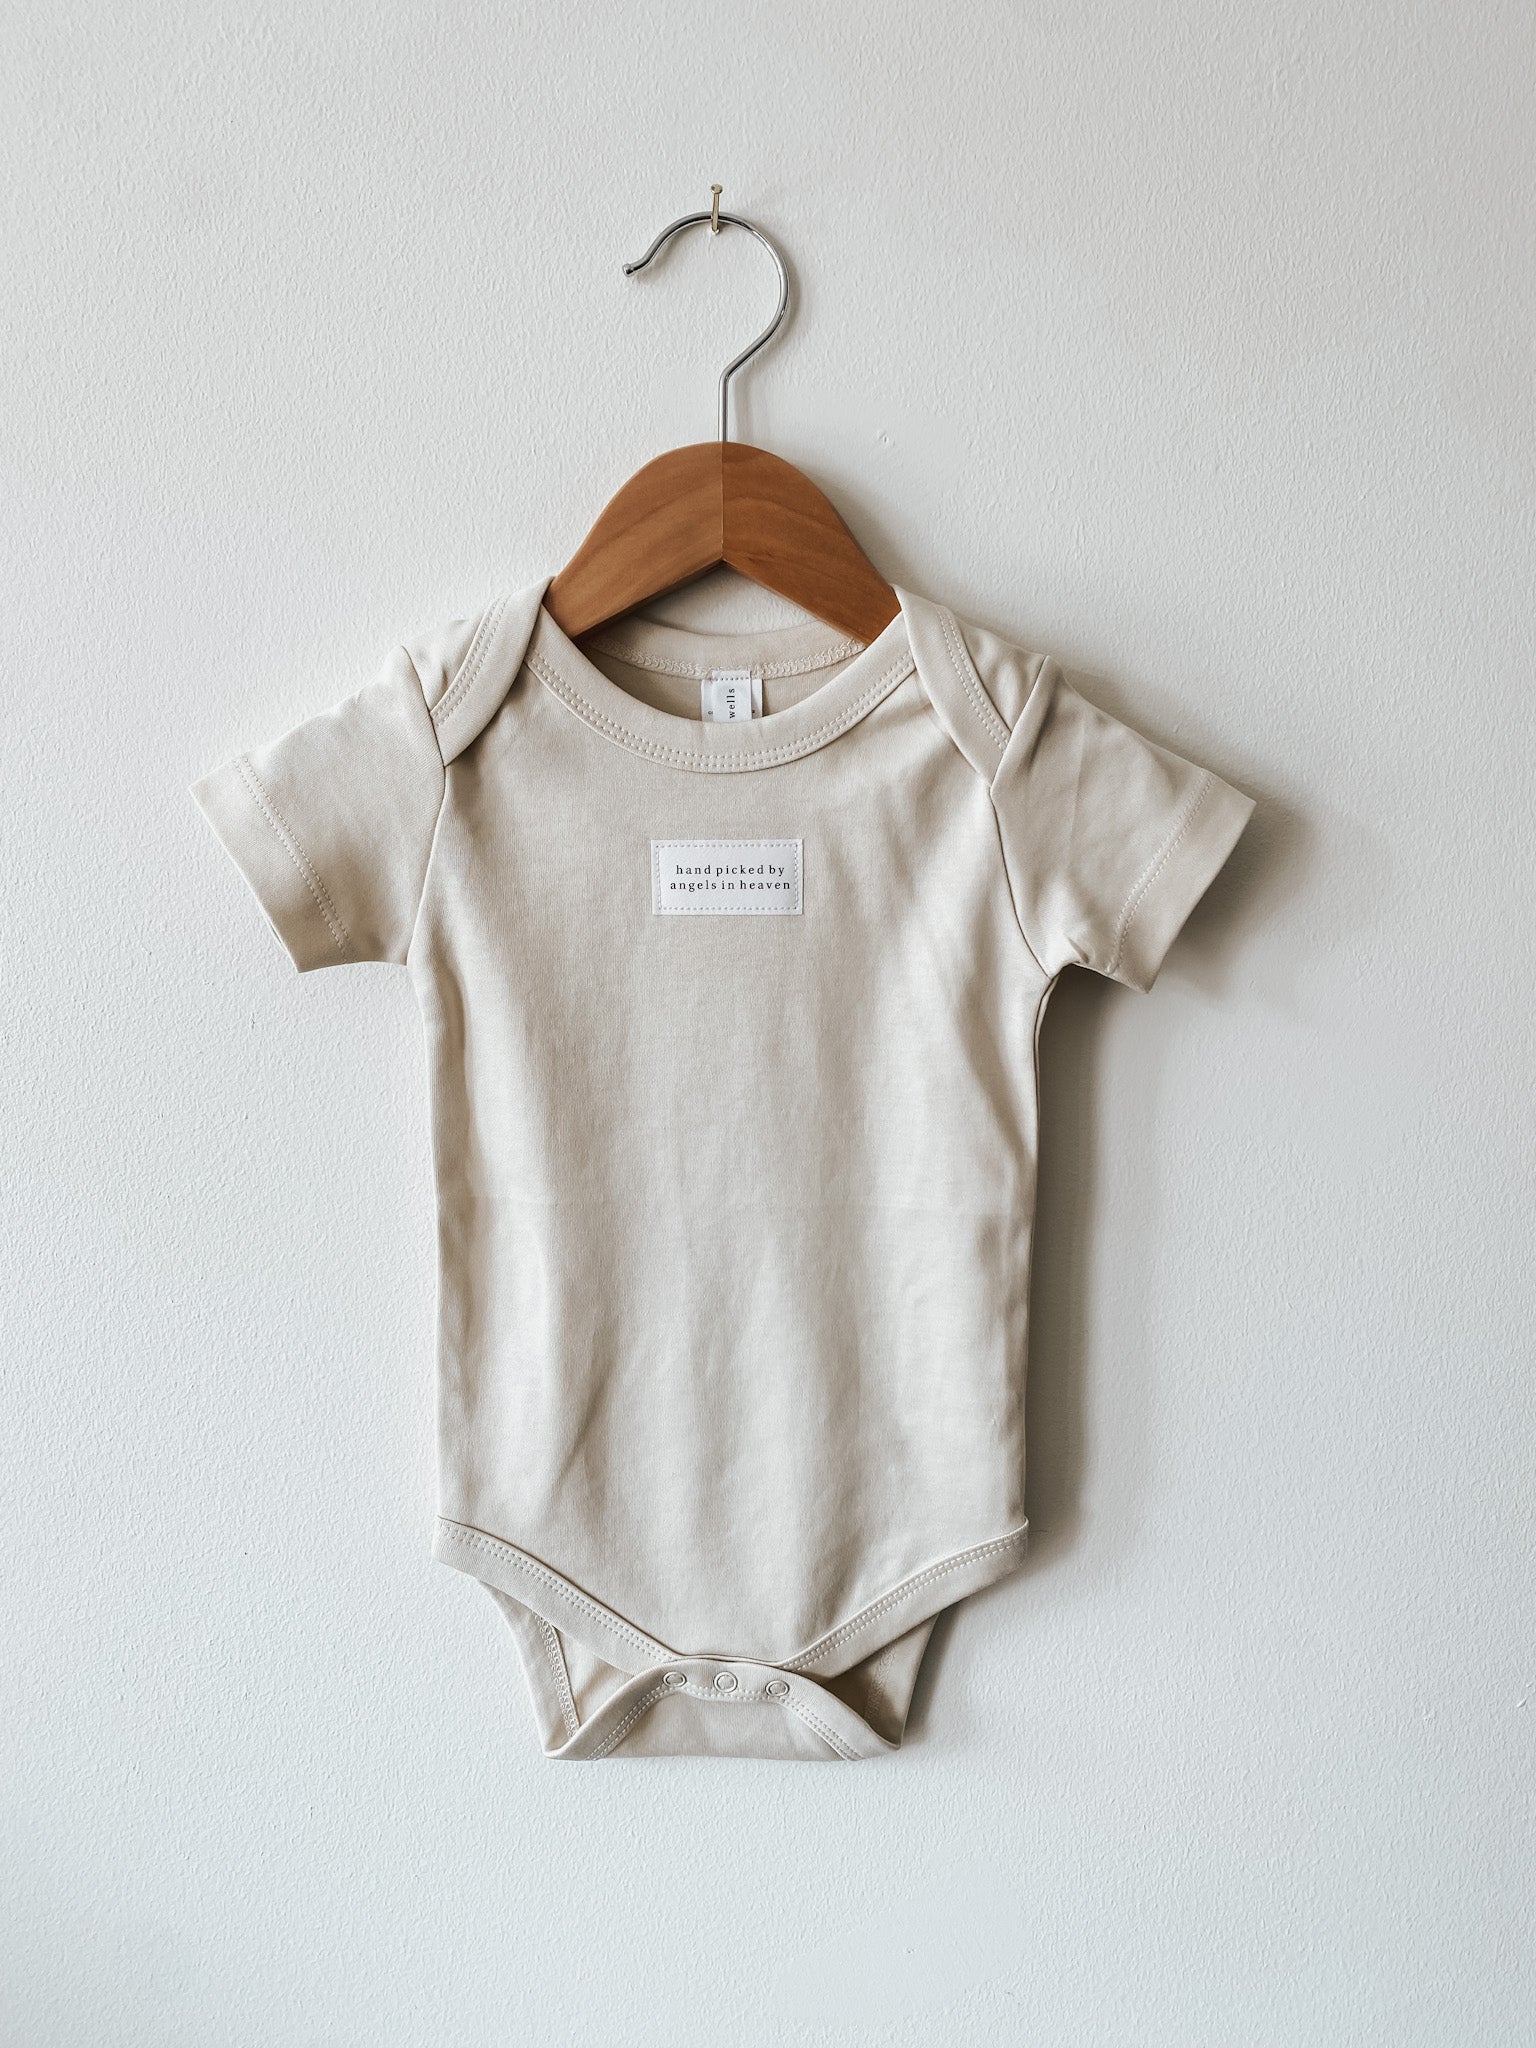 Classic Short Sleeve Bodysuit | Hand Picked By Angels